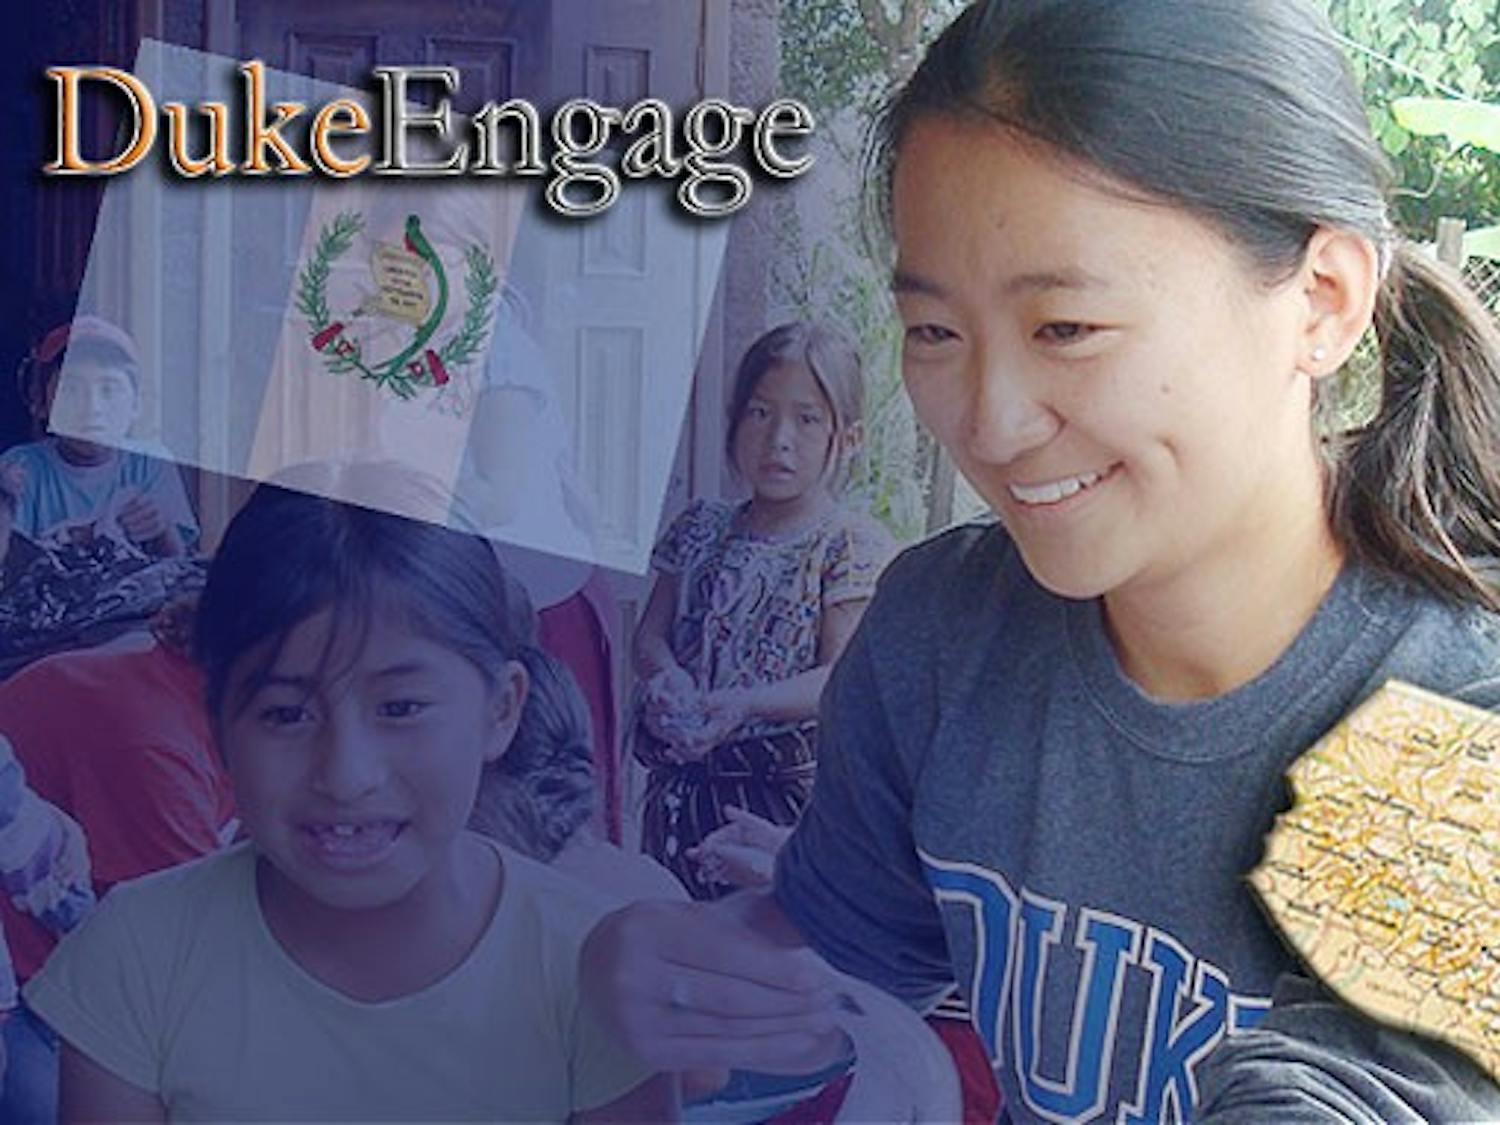 The Calhuitz, Guatemala DukeEngage program, new for summer 2012, was canceled due to concerns about student safety in case of an emergency.